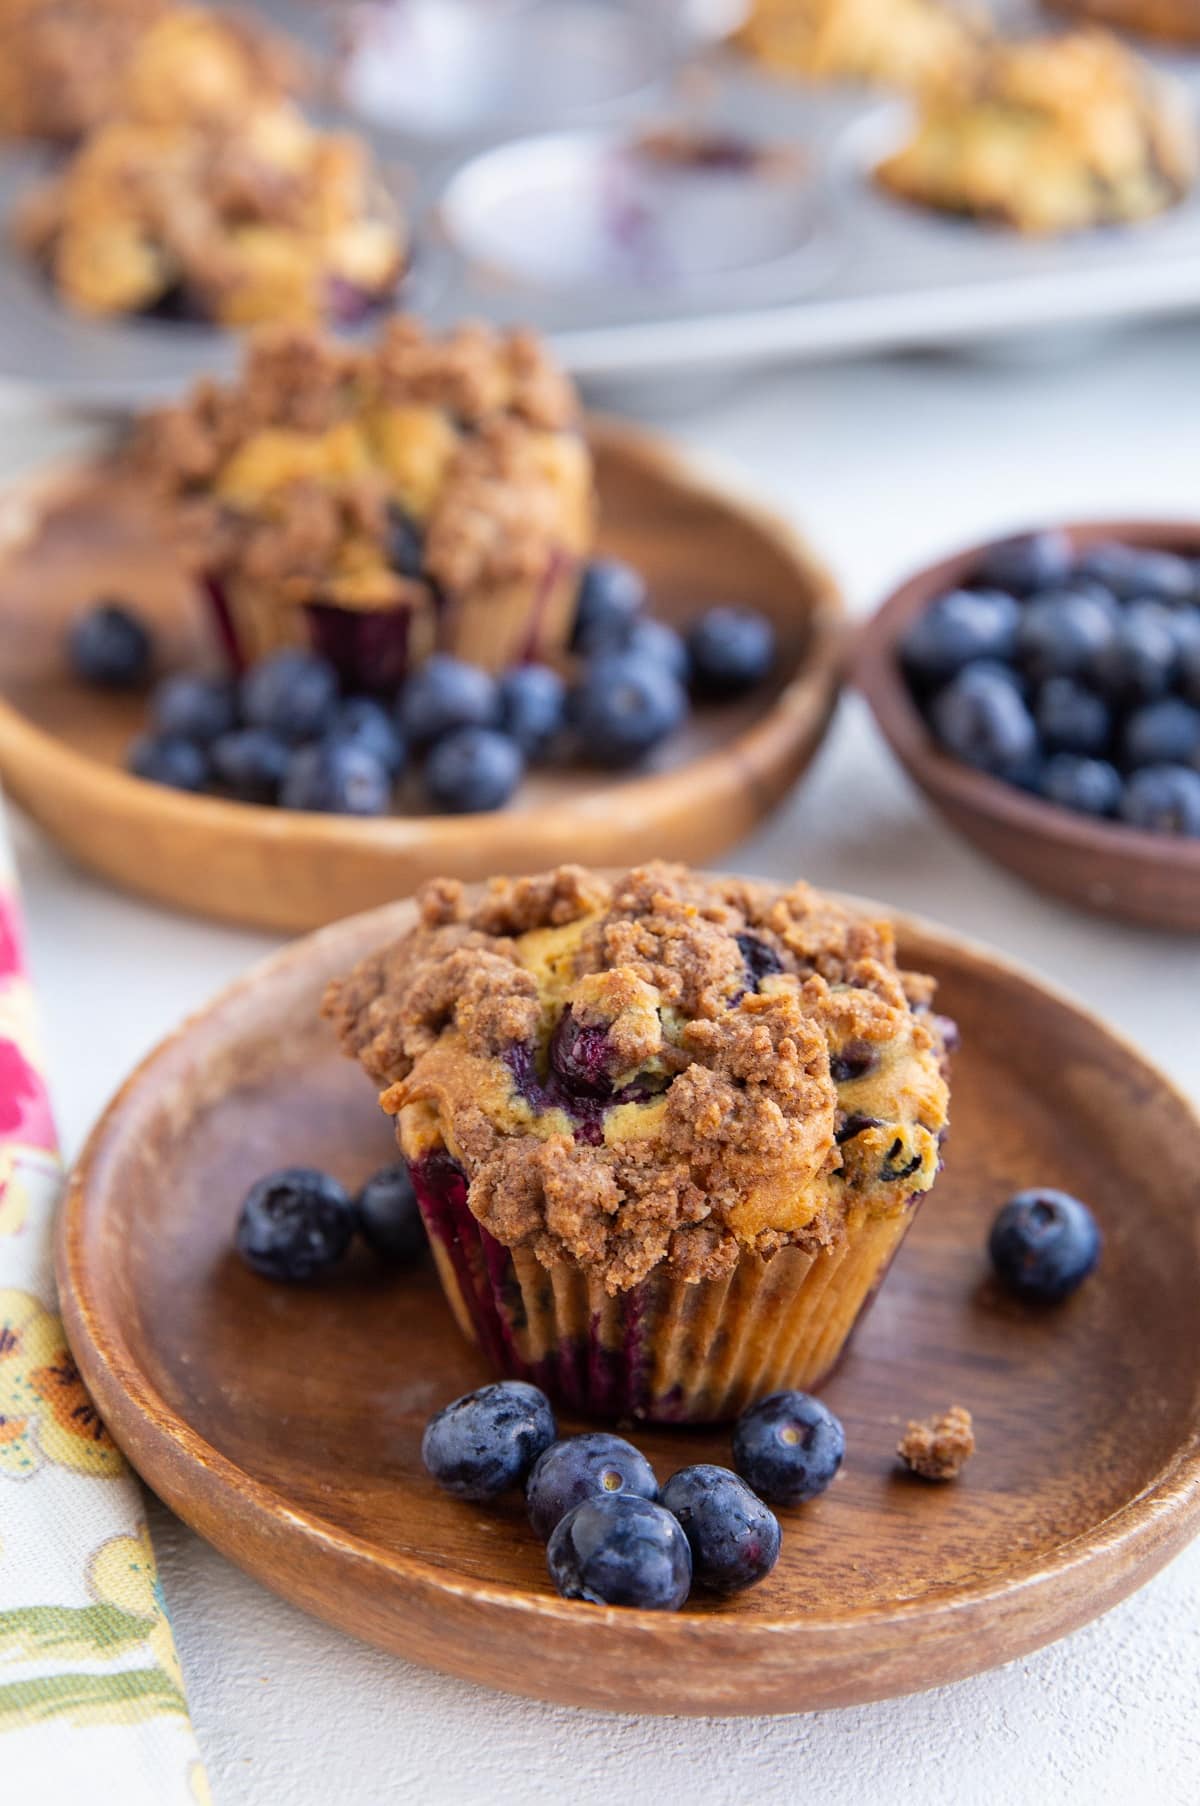 Two blueberry muffins on wooden plates, ready to eat.